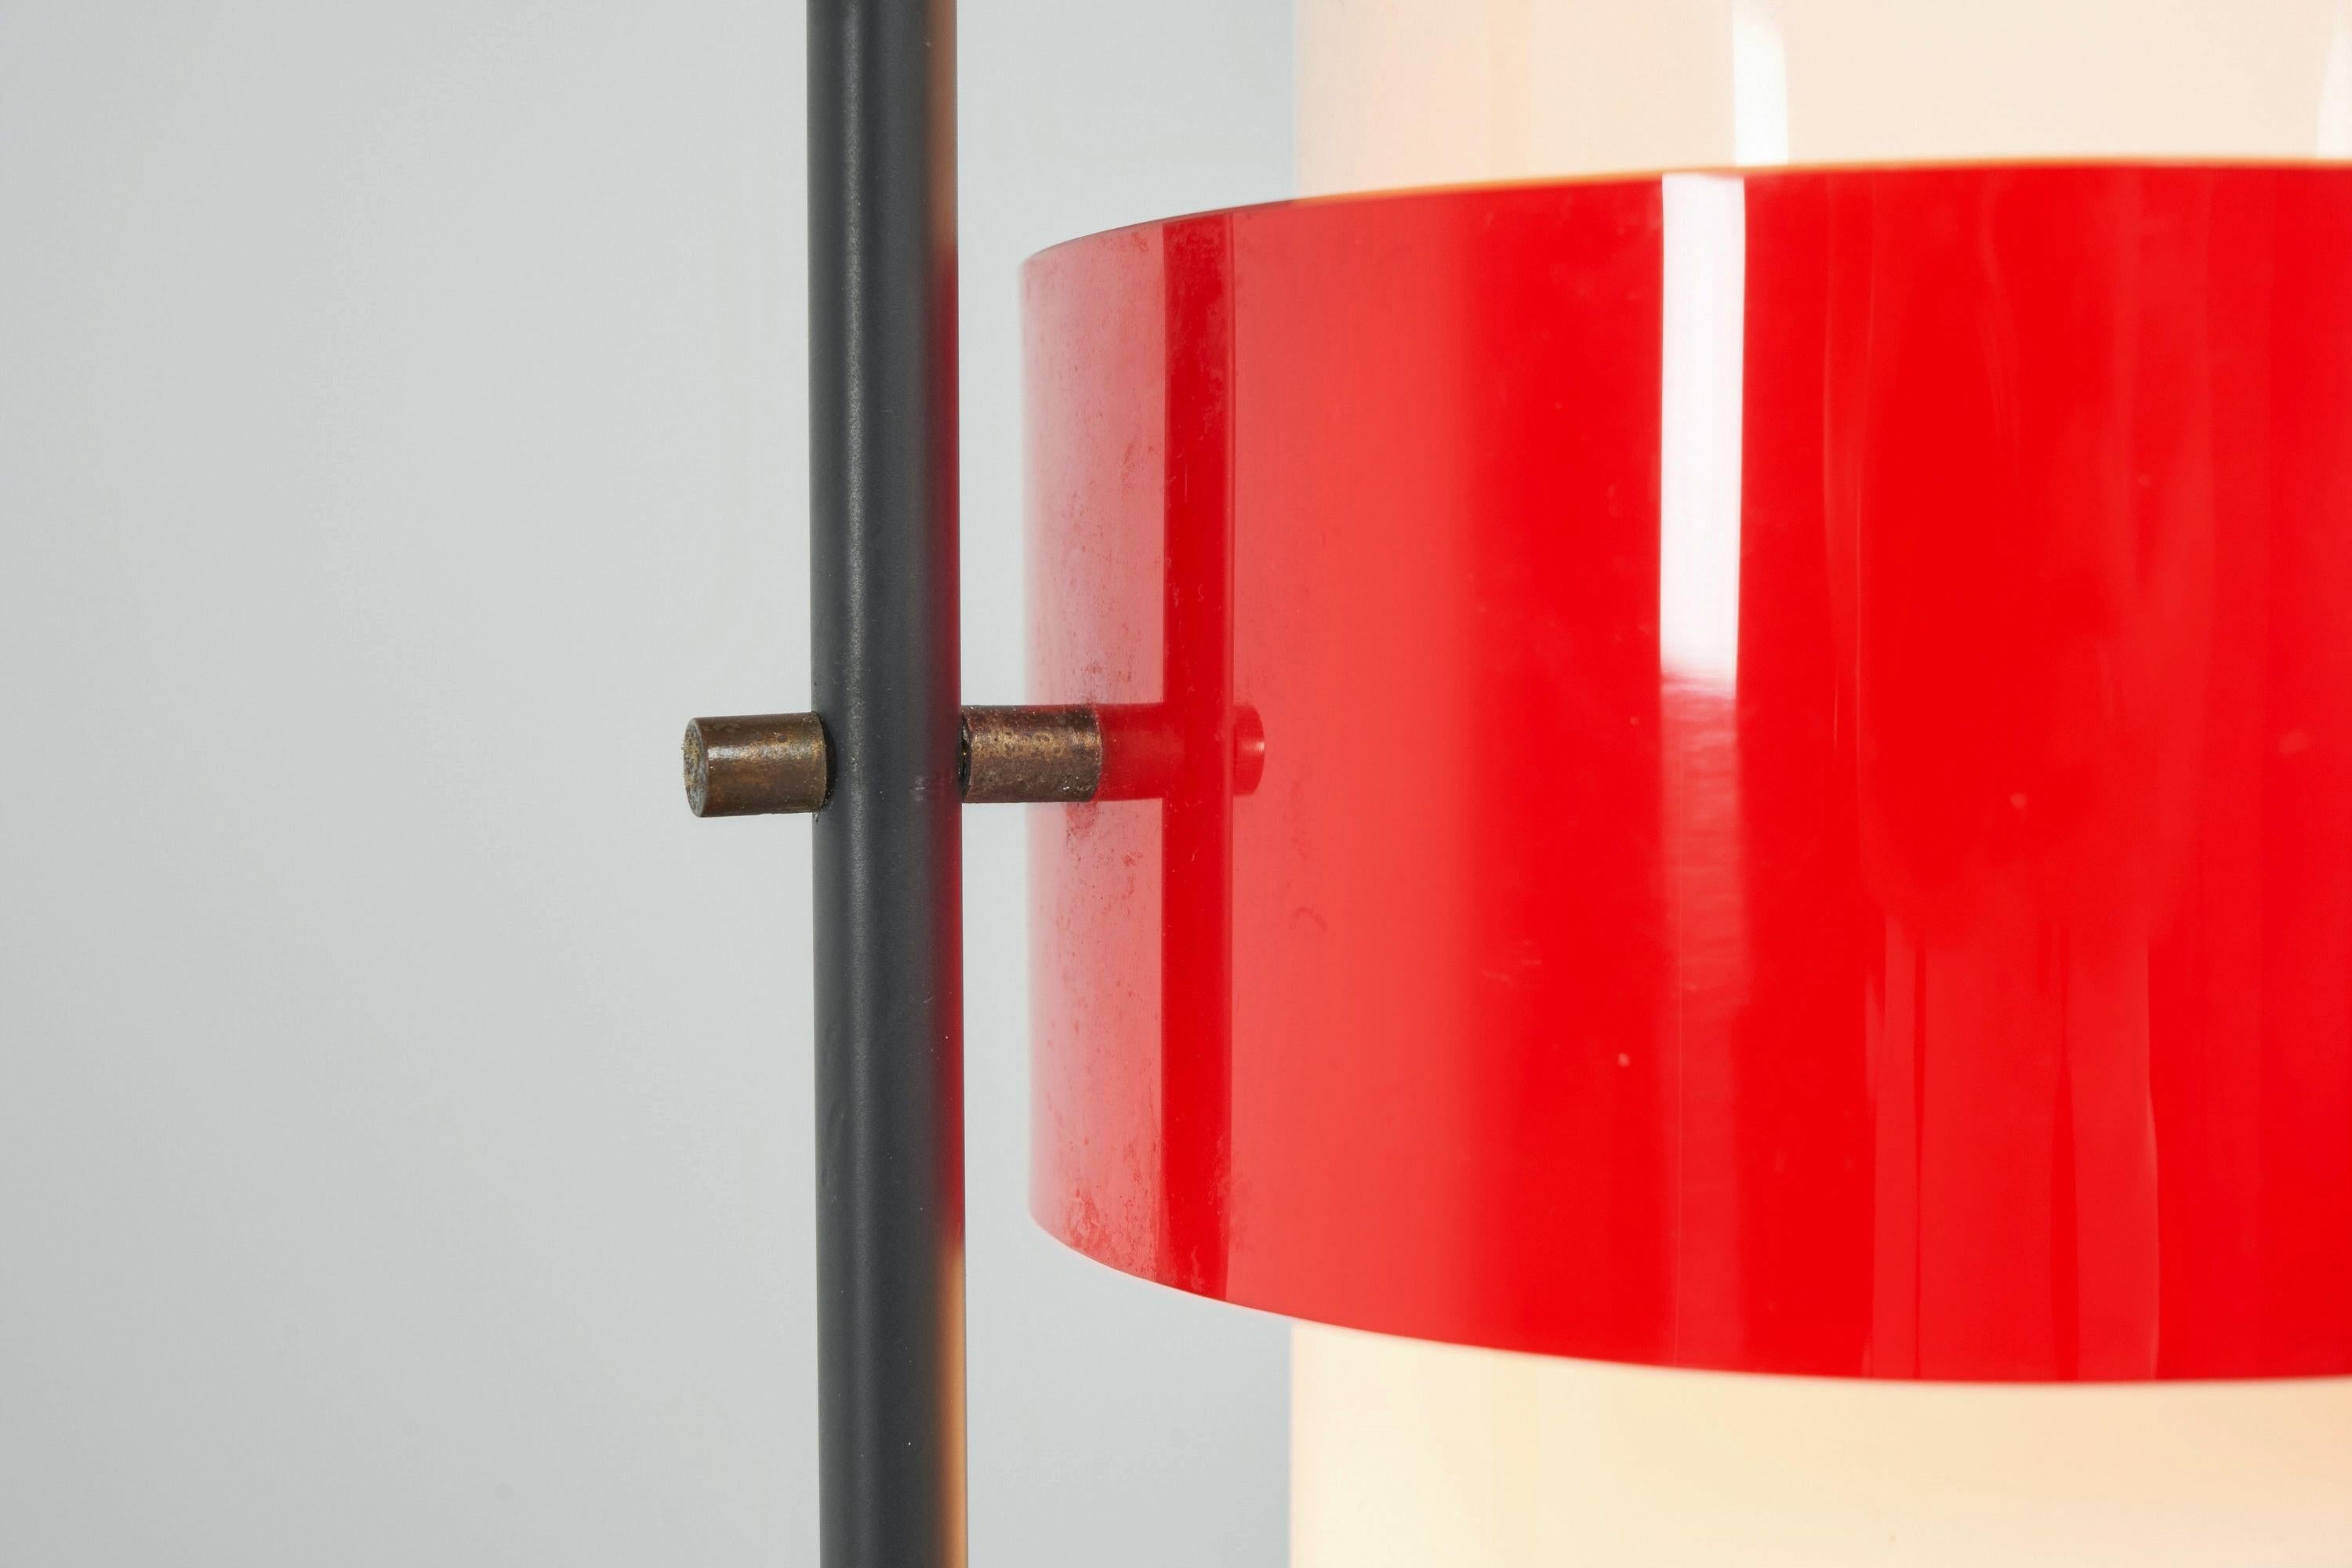 Mid-Century Modern Stilnovo Floor Lamp in Red Perspex, Italy, 1955 For Sale